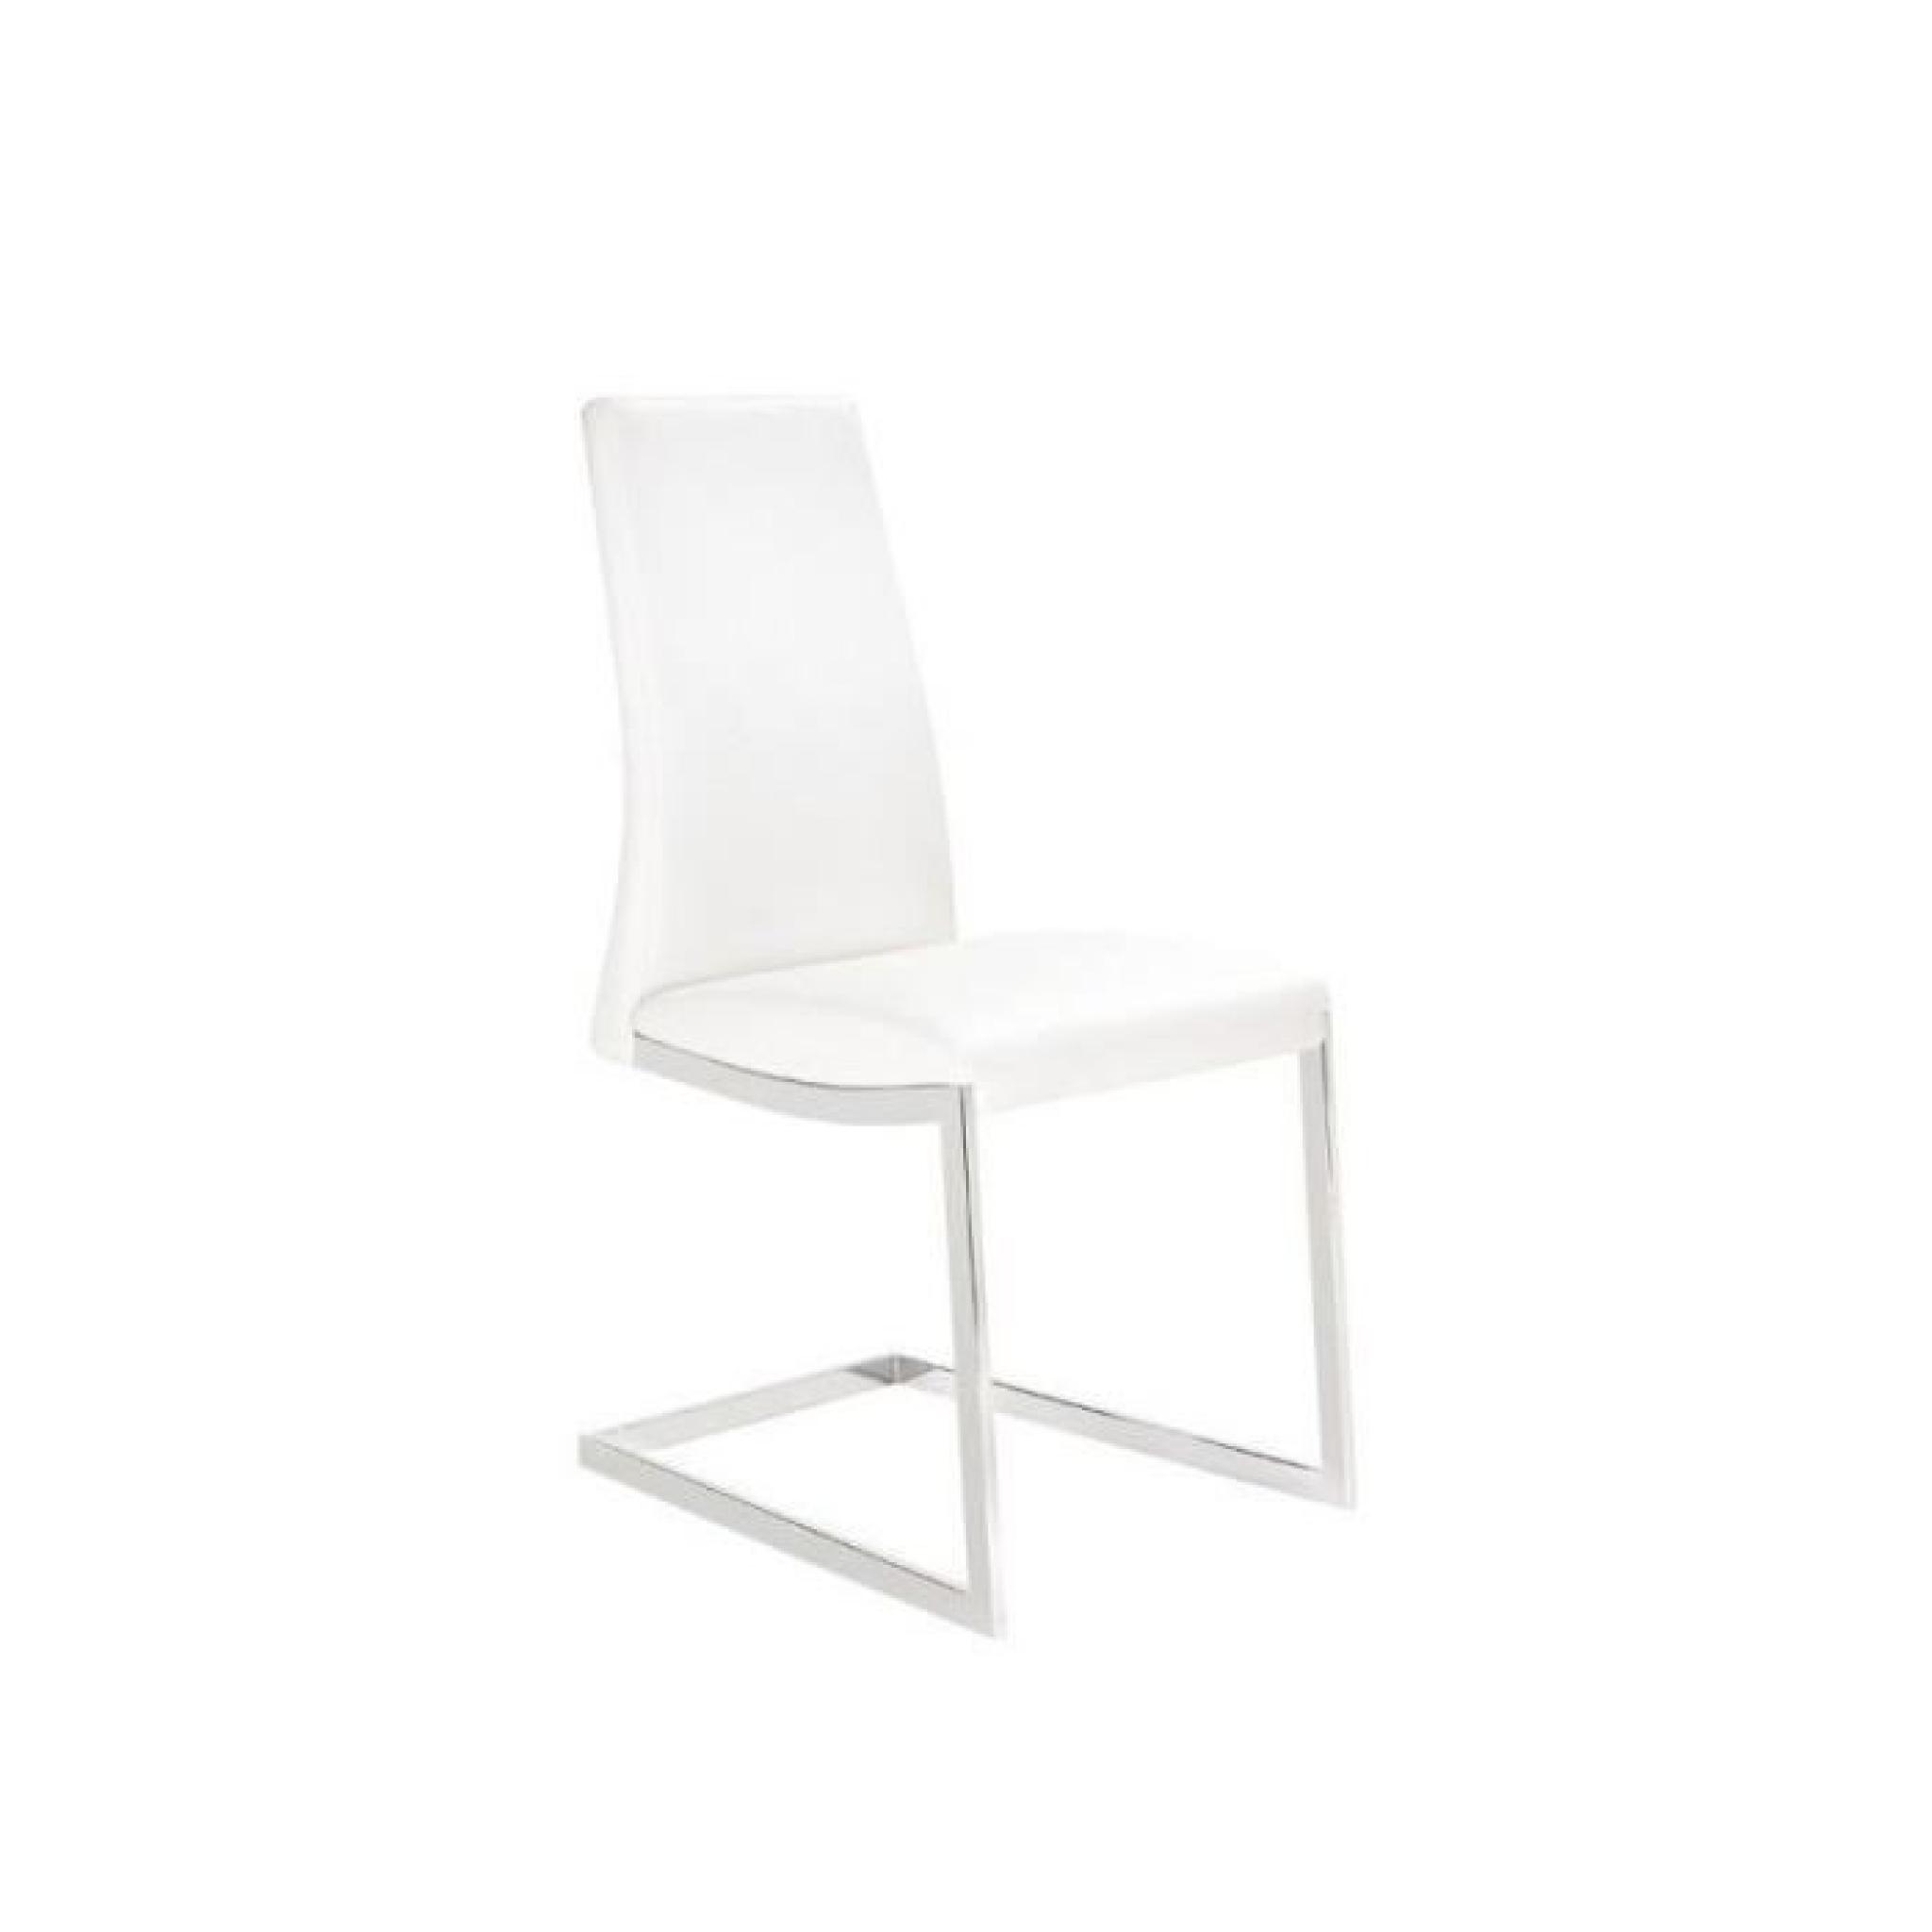 JUSThome H-610 Chaise Blanc 95 x 46 x 44